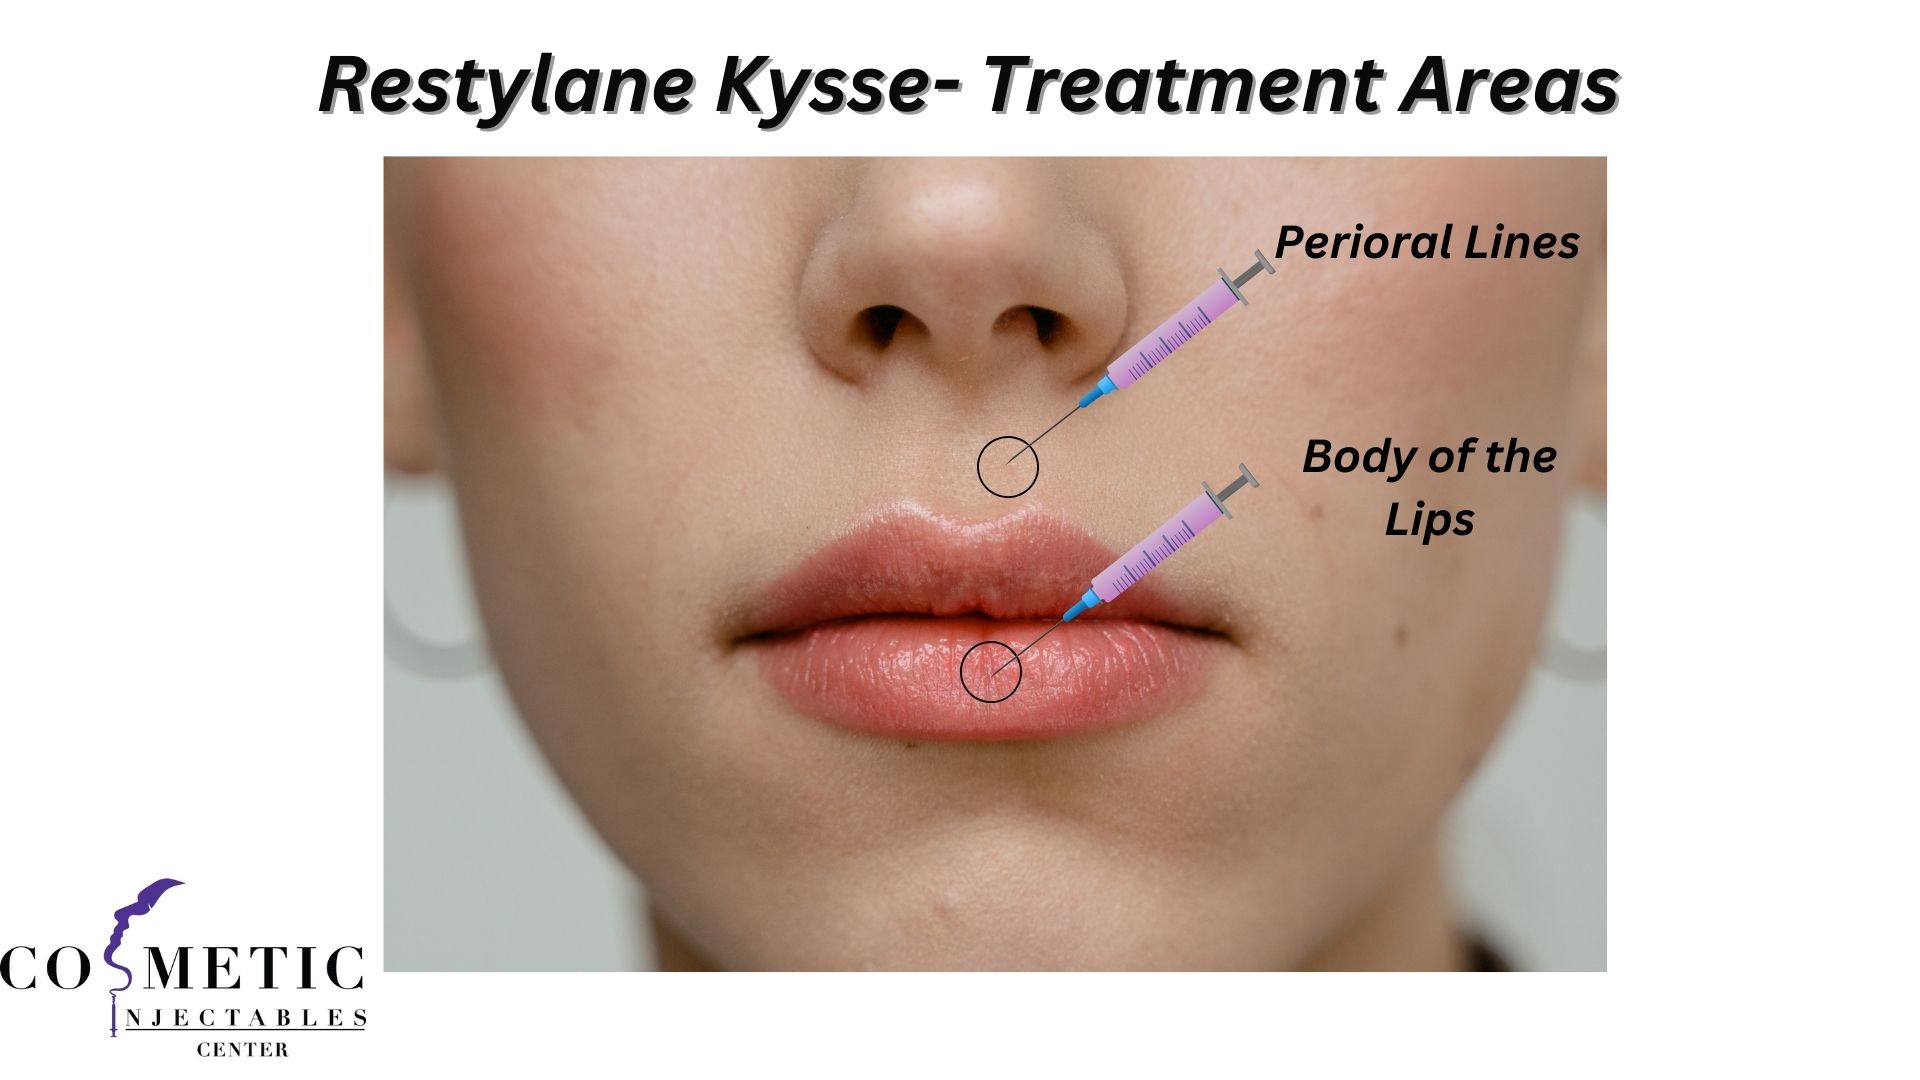 Detailed Illustration Of Restylane Kysse Injection Sites For Smoothing Perioral Lines.